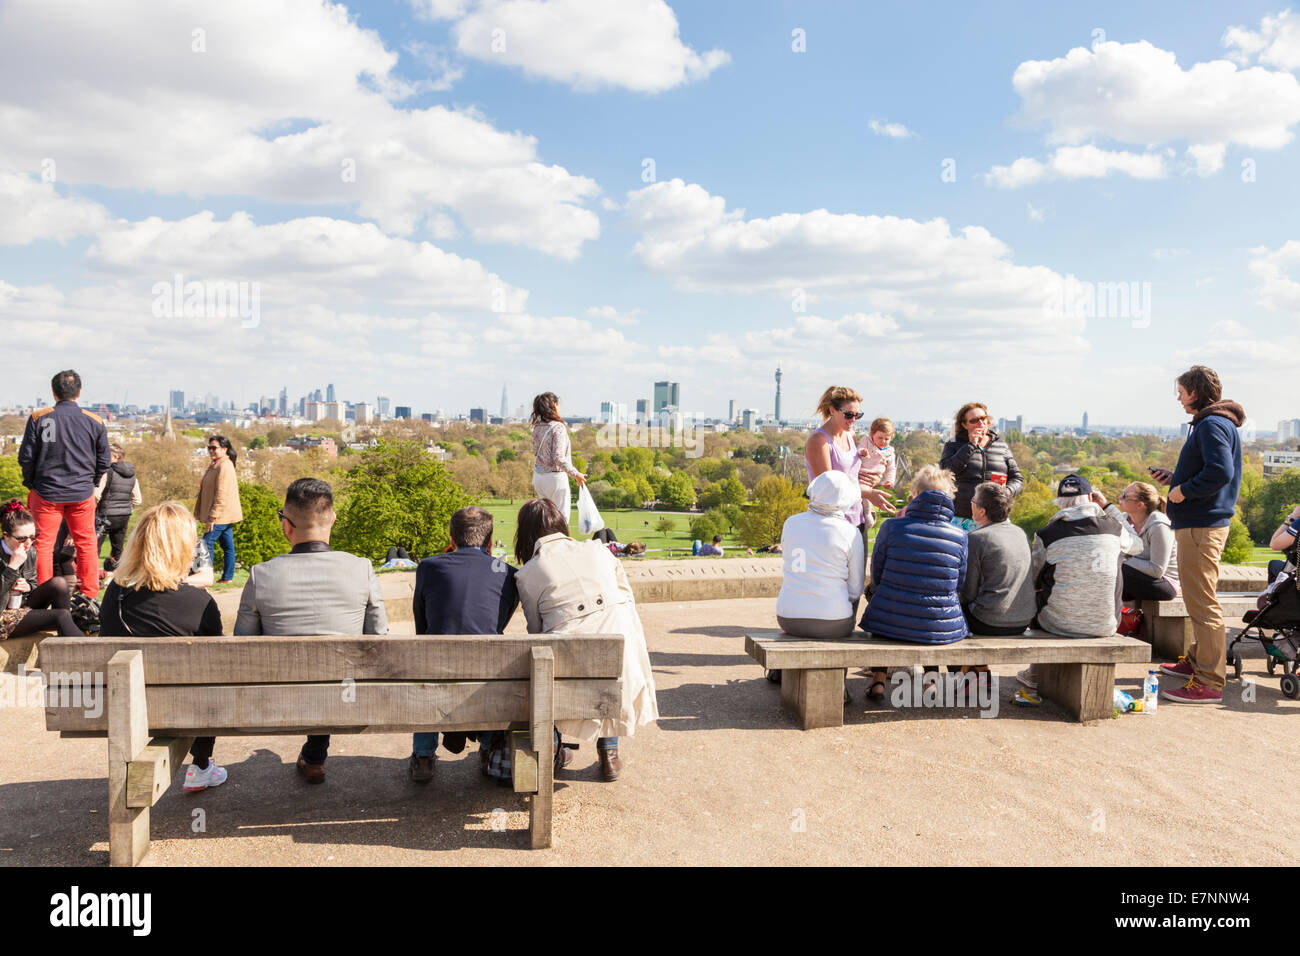 London viewpoint. People sitting on benches in the Spring sunshine viewing the distant city skyline from Primrose Hill, London, England, UK Stock Photo